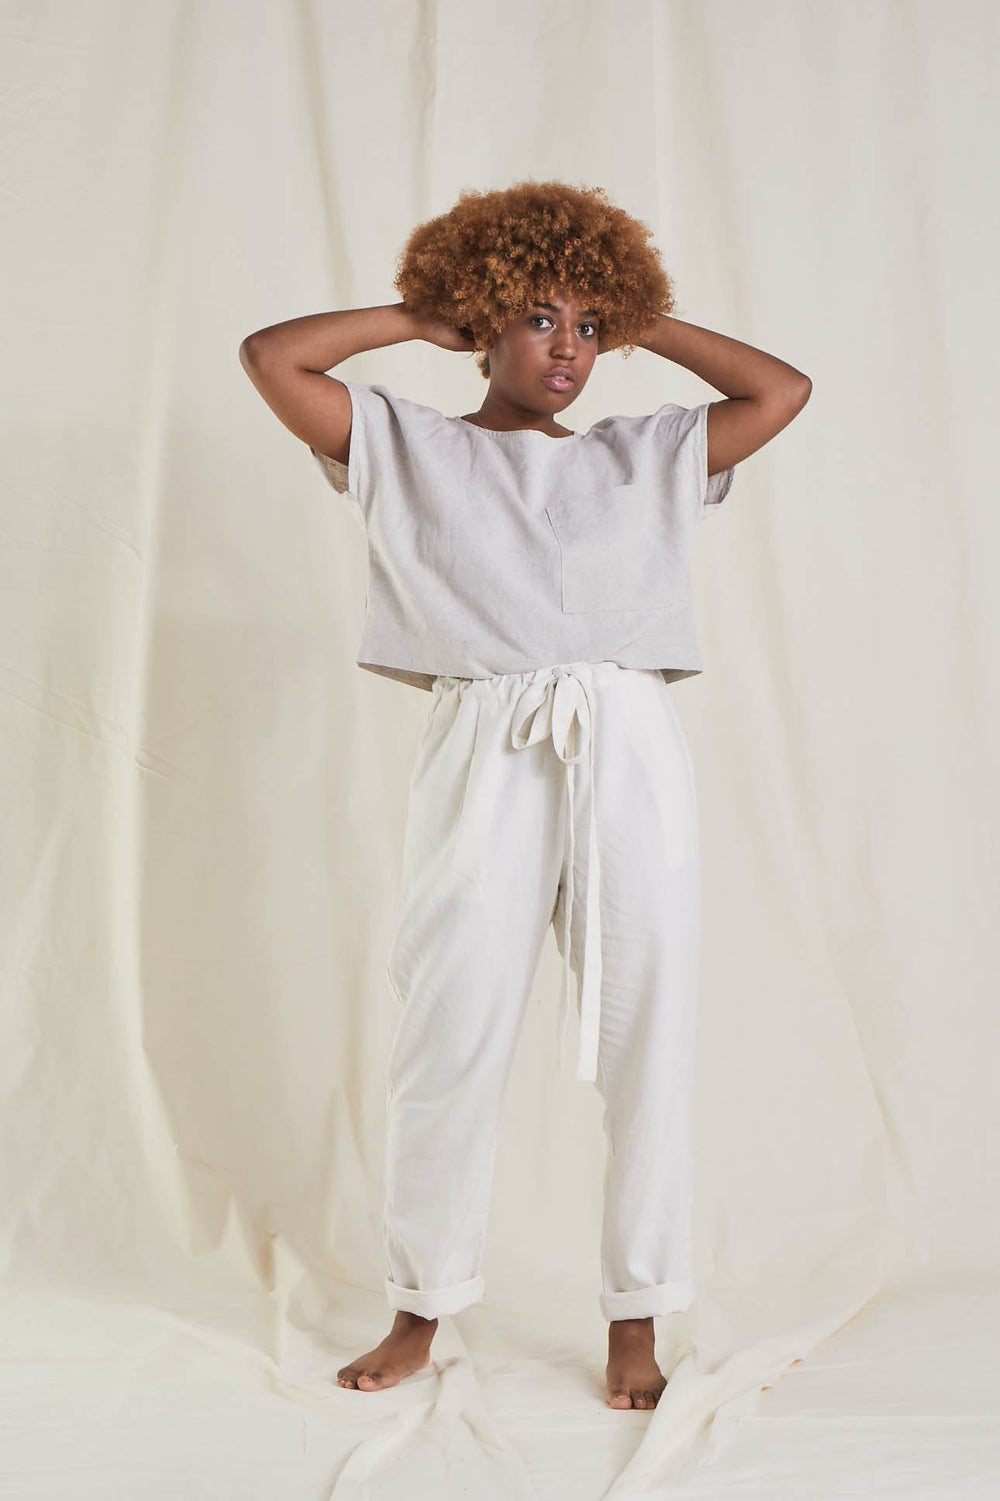 Women wearing the Miller Trousers sewing pattern from Paper Theory Patterns on The Fold Line. A trouser pattern made in cotton, linen, drill, canvas, lightweight denim, wool crepe or viscose twill fabrics, featuring a relaxed fit, drawstring waist, high w